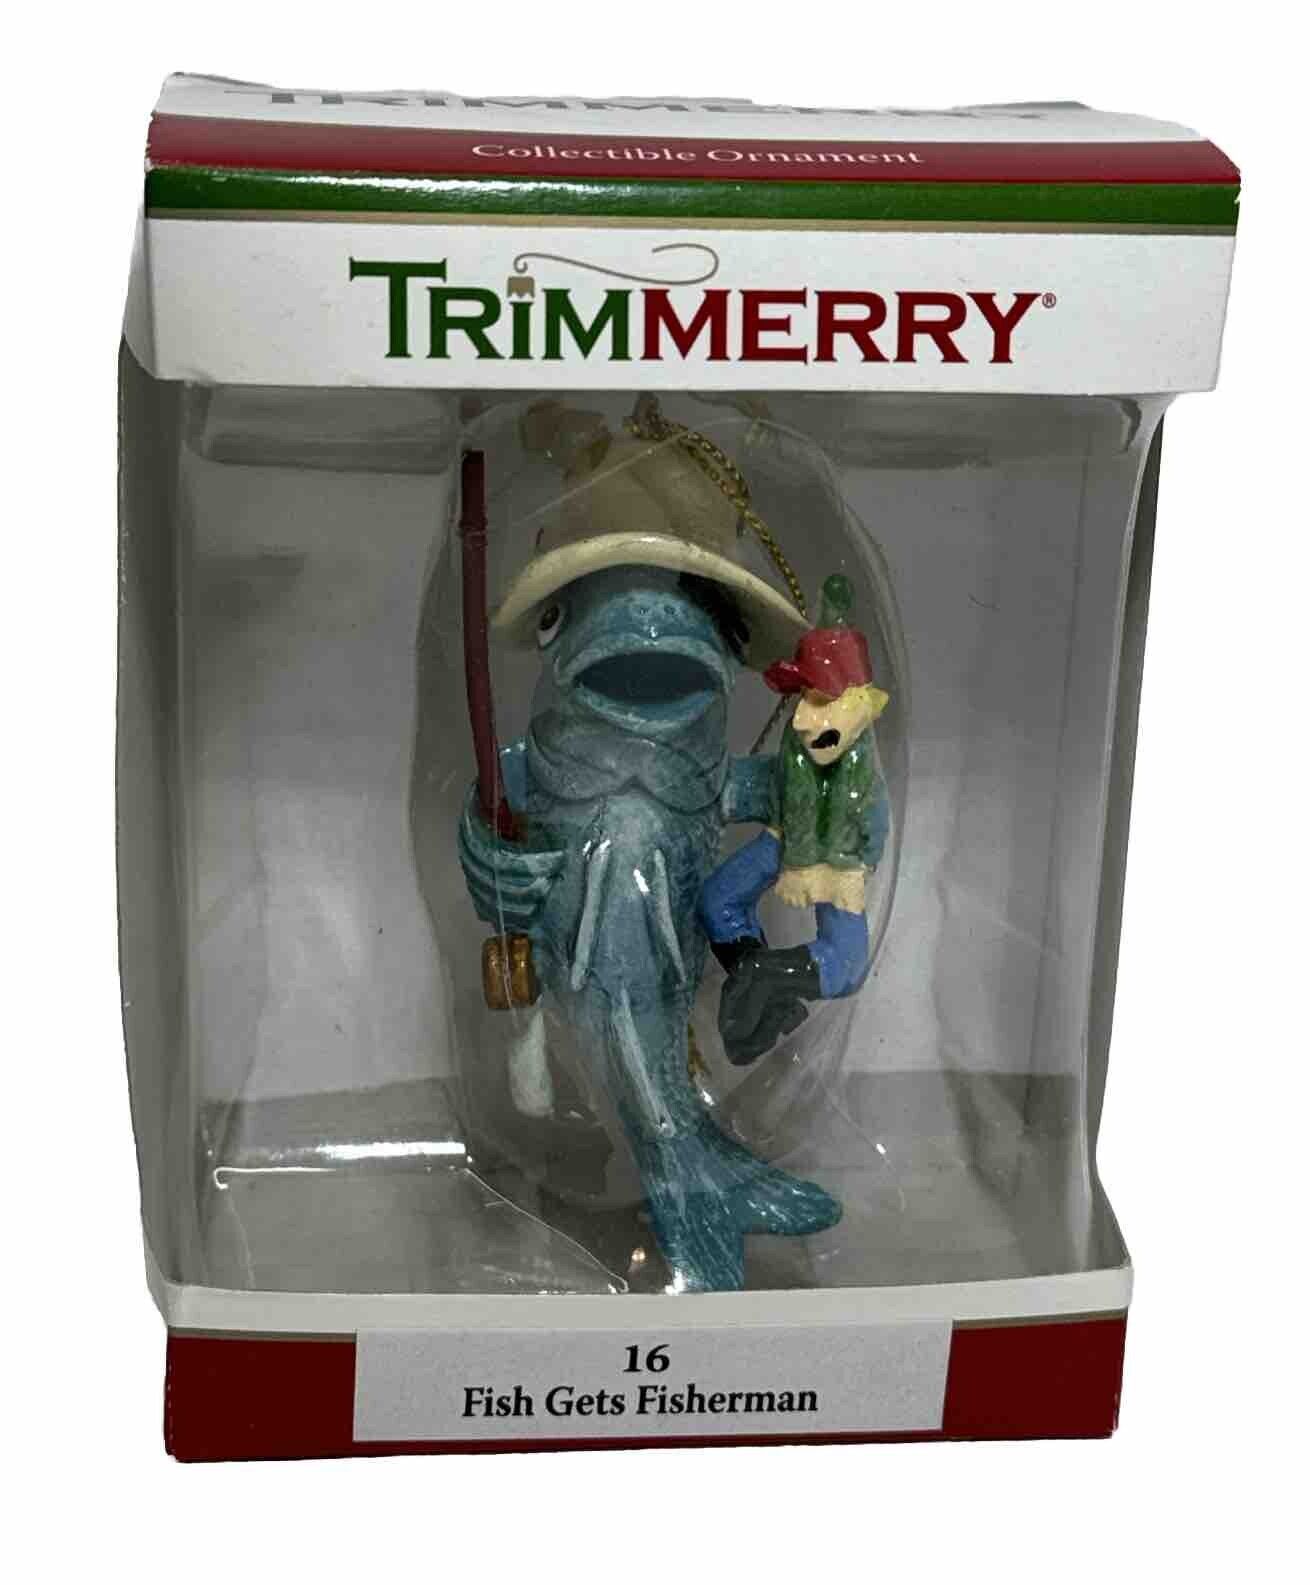 2010 Trim Merry Collectible Ornament #16 Fish Gets Fisherman Size 3” New In Box